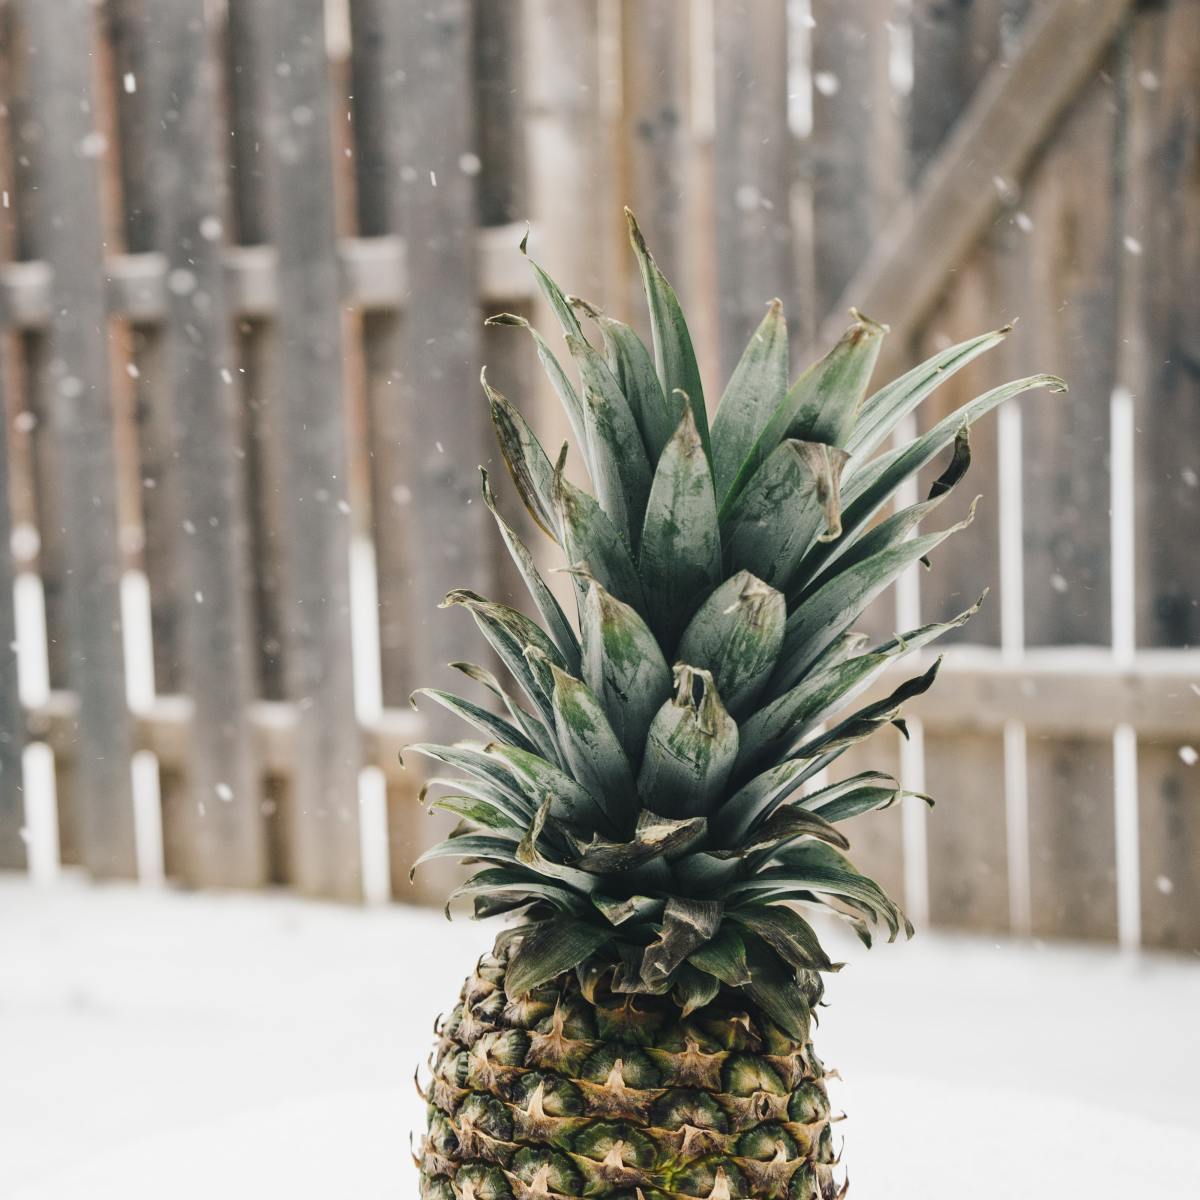 Photo by Pineapple Supply Co. on Unsplash